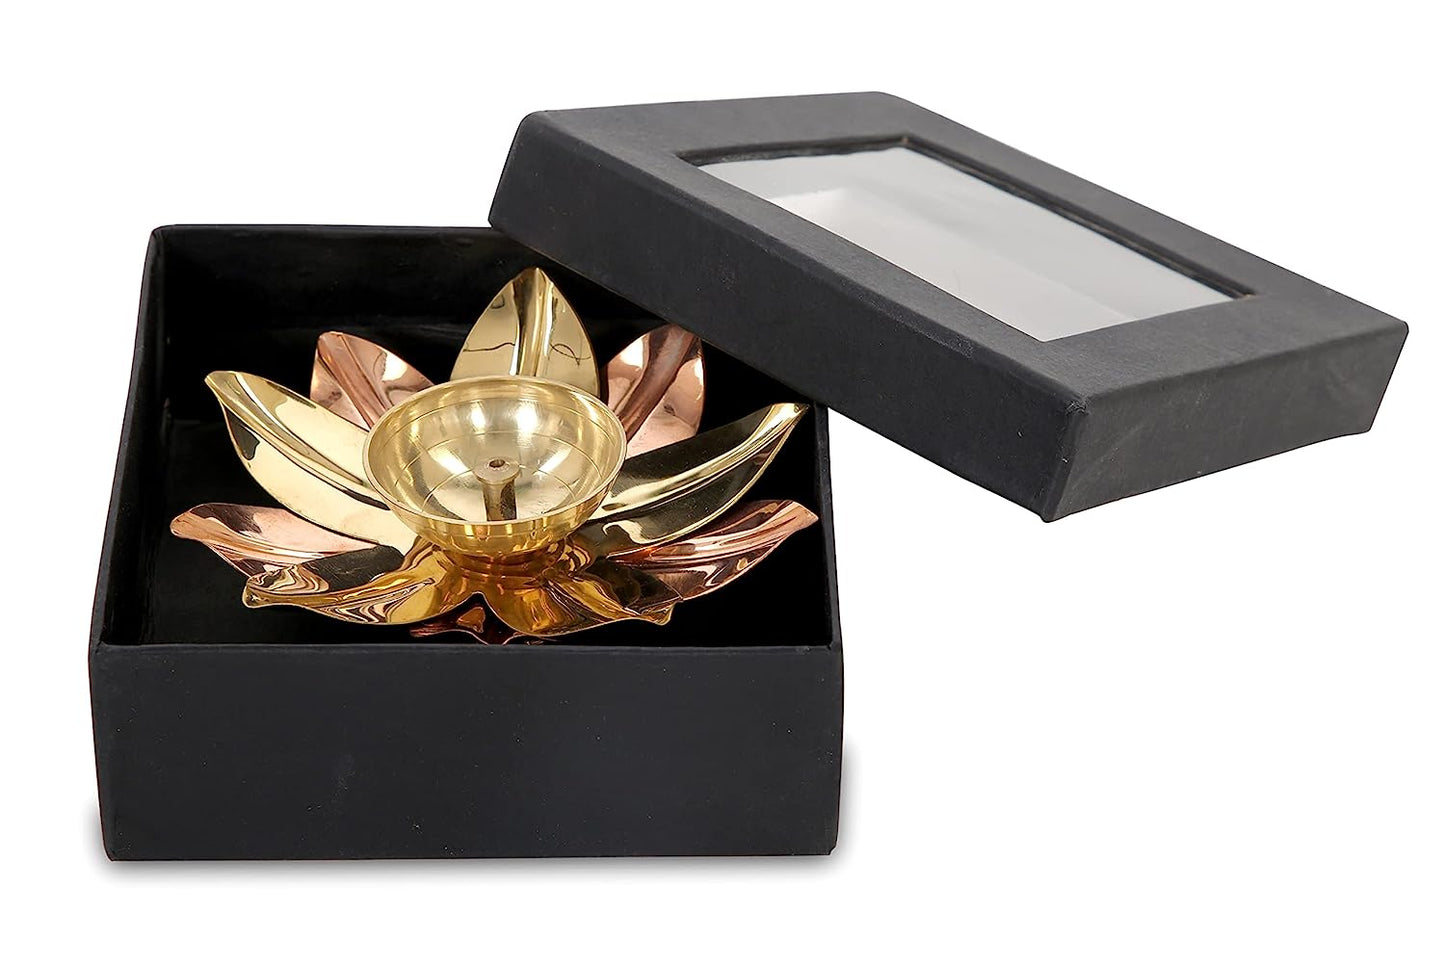 Rudra Exports Brass & Copper Akhand Jyot Diya with Decorative Oil Diya Lotus Shape for Diwali, Puja and Festival Decoration